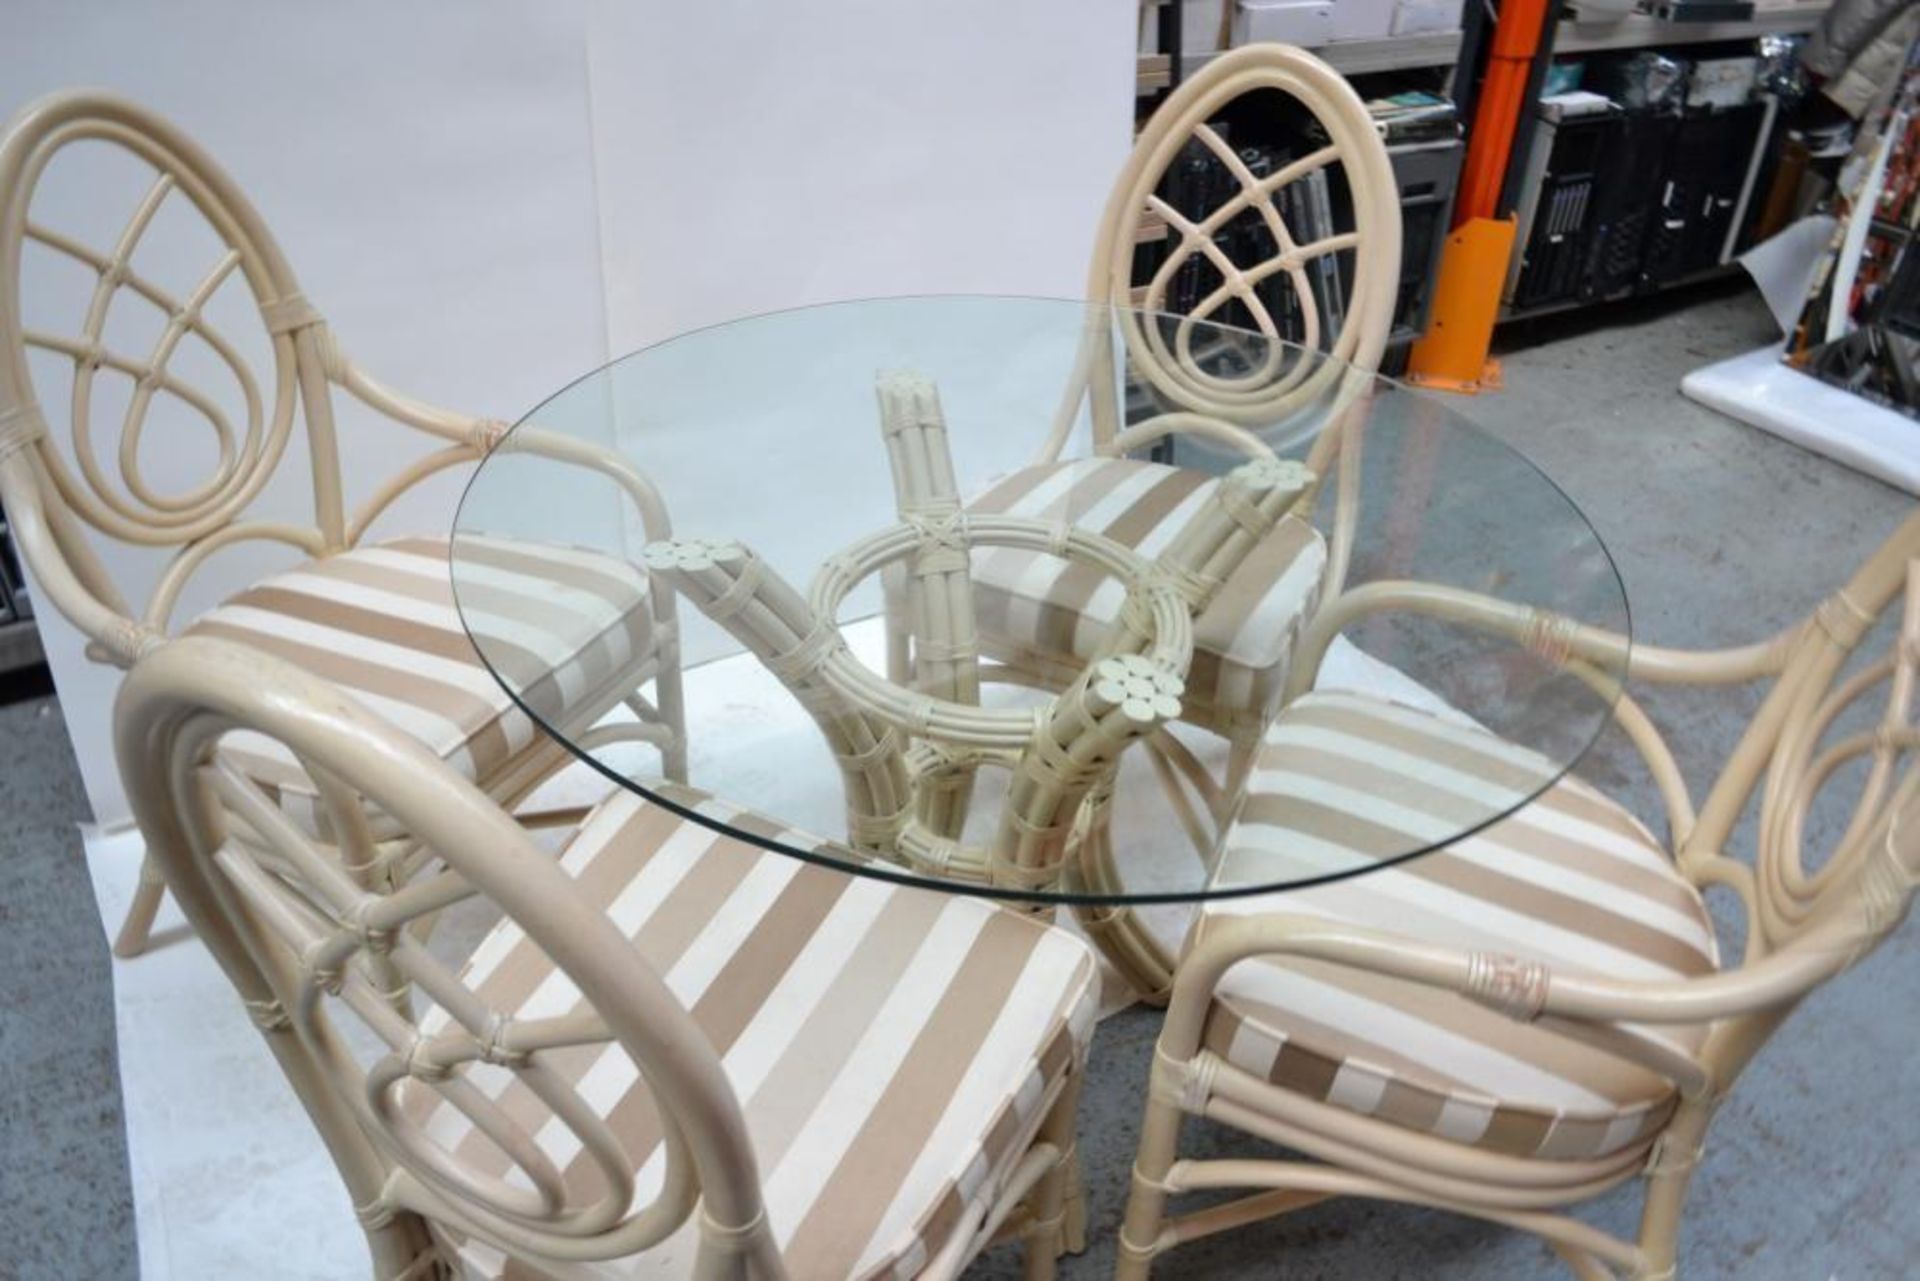 1 x Glass Topped Cane Table with 4 Chairs - Pre-owned In Good Condition - AE010 - CL007 - - Image 4 of 13